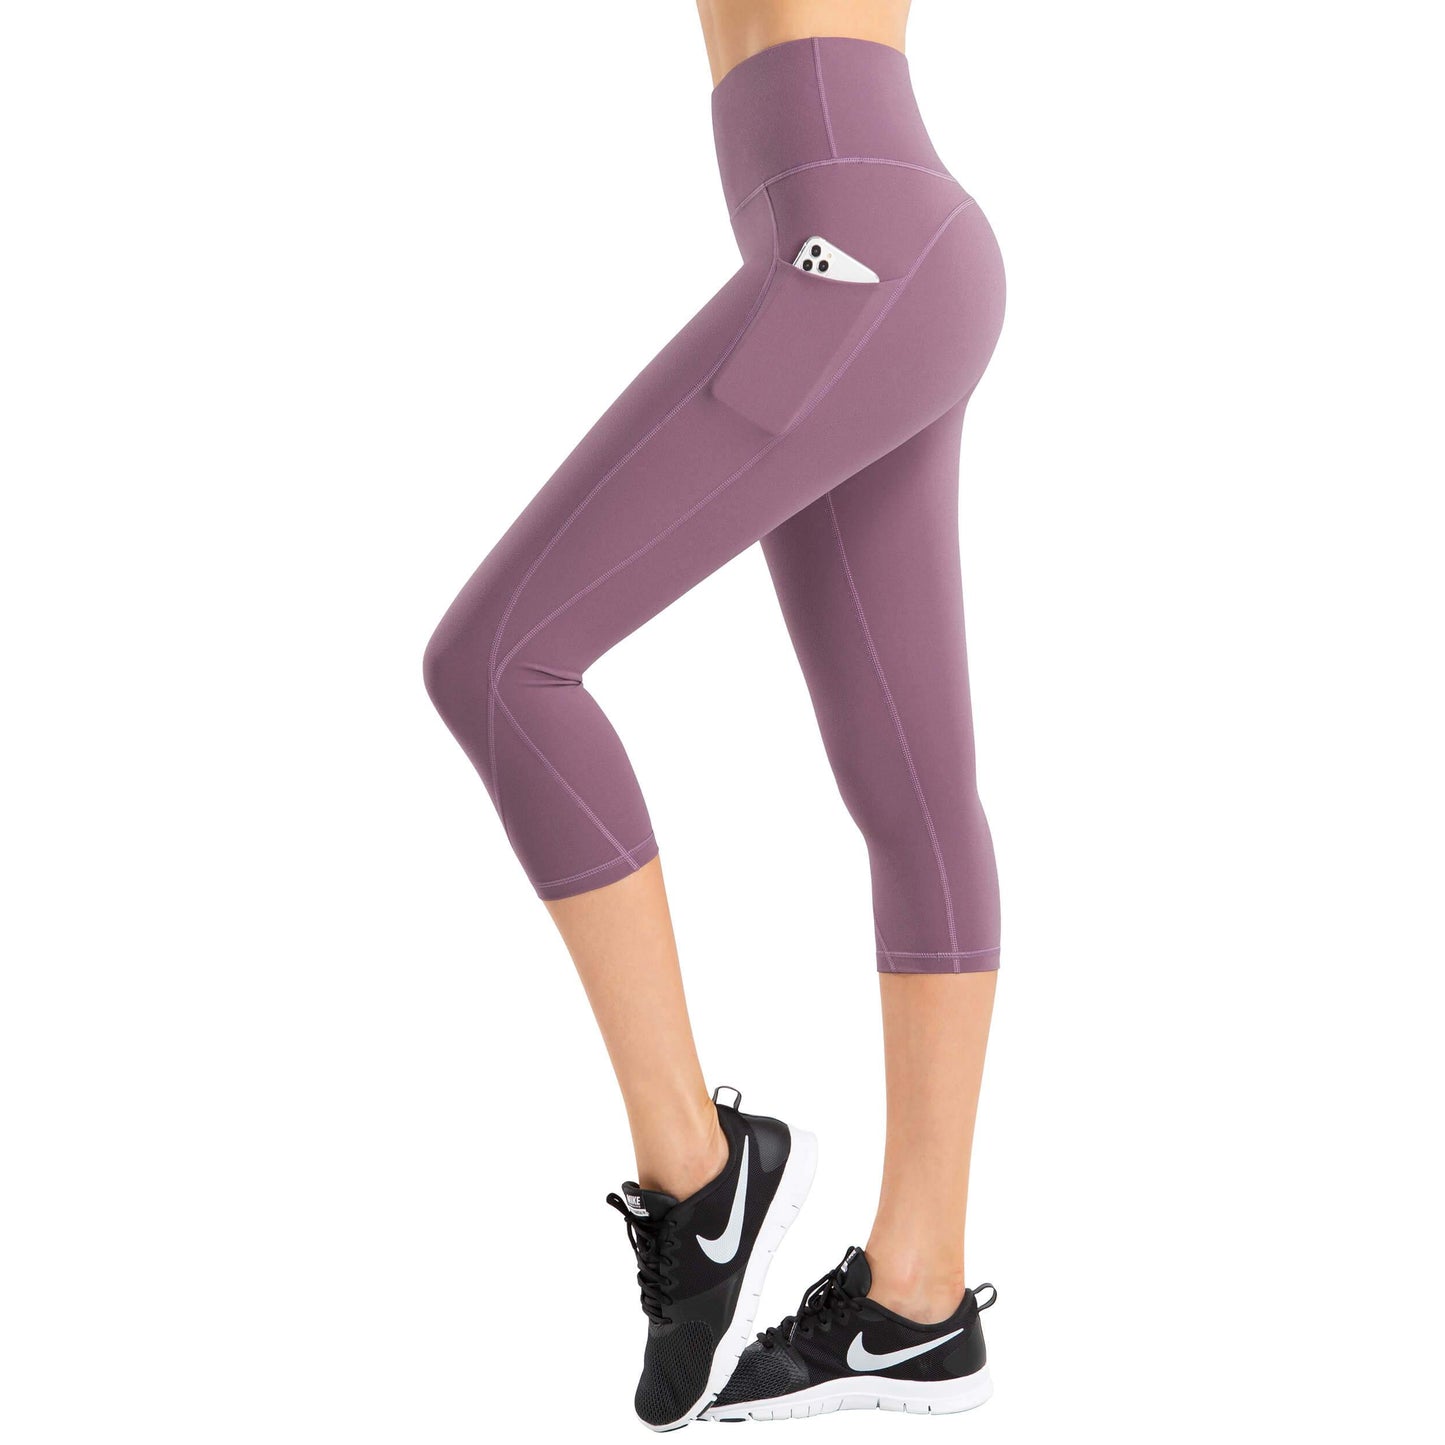 iKeep<sup>&reg;</sup> Next Level Excise Yoga Capris with pockets